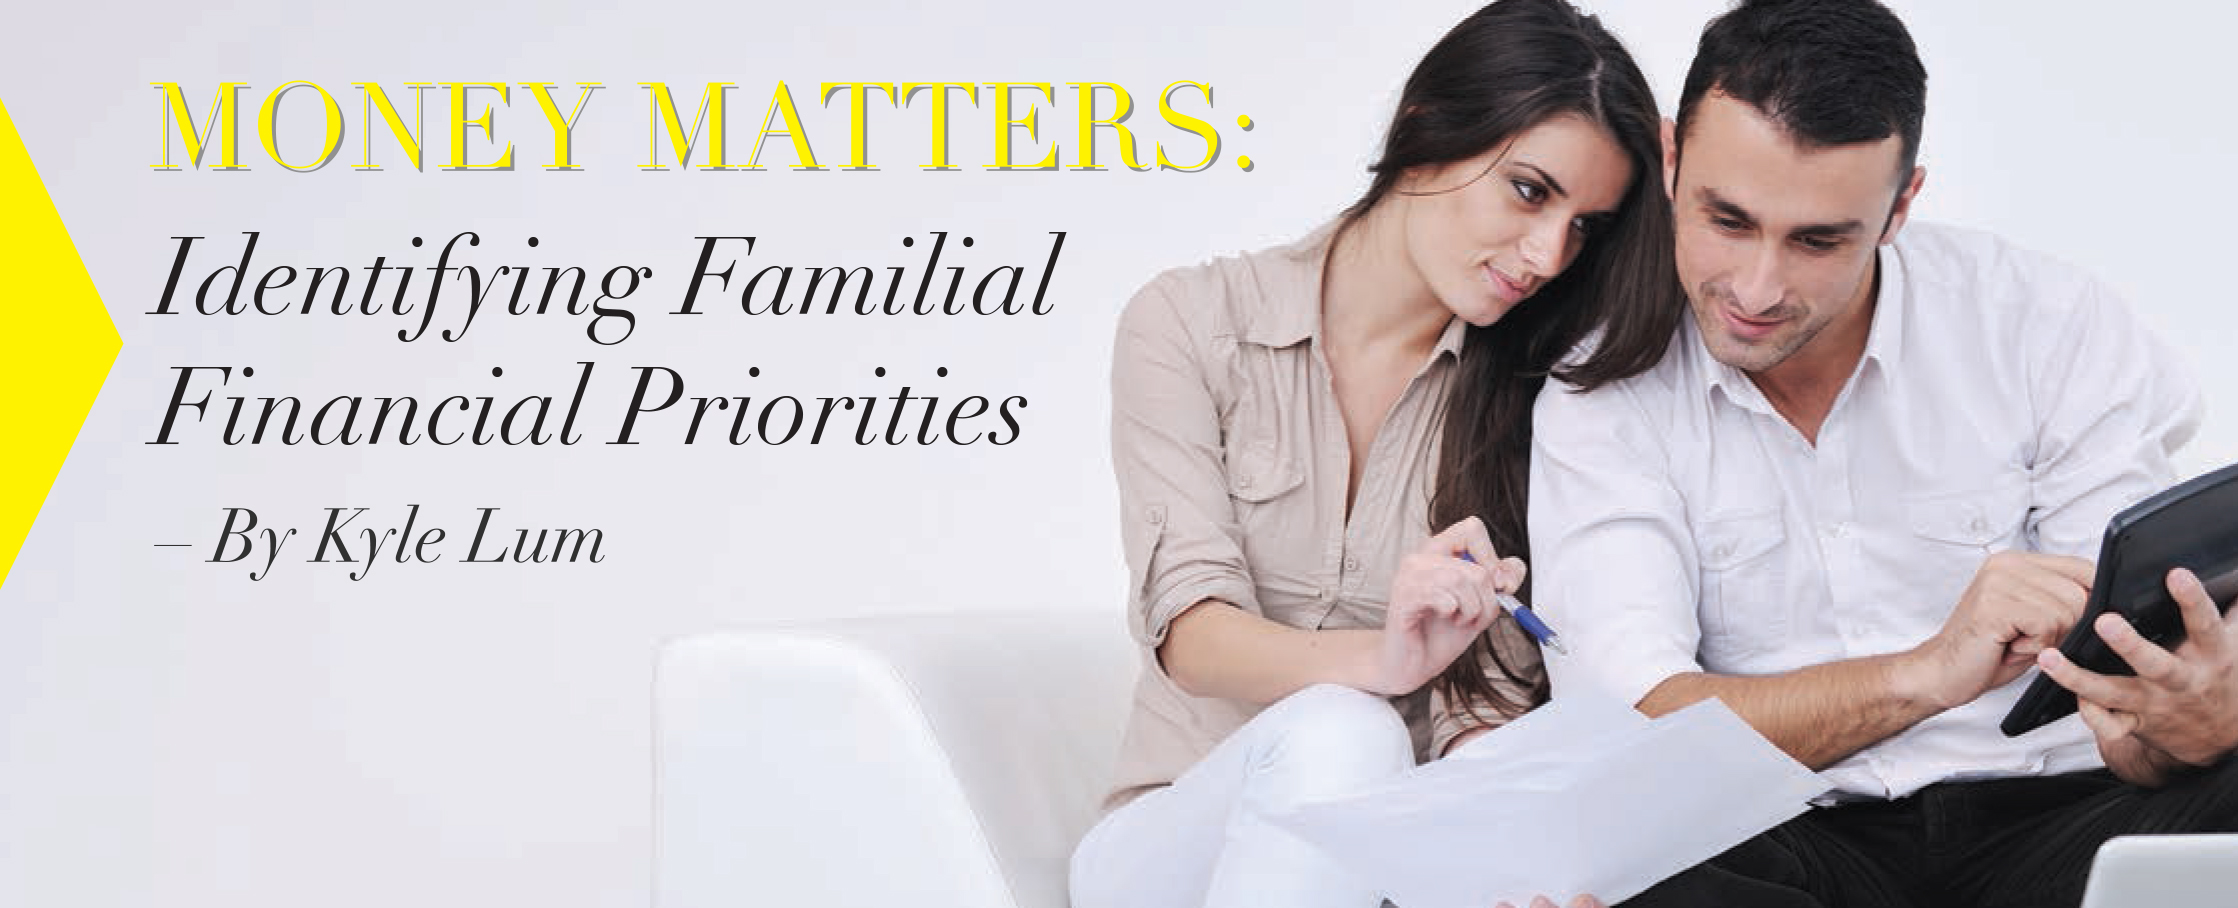 Money Matters Identifying Familial Financial Priorities